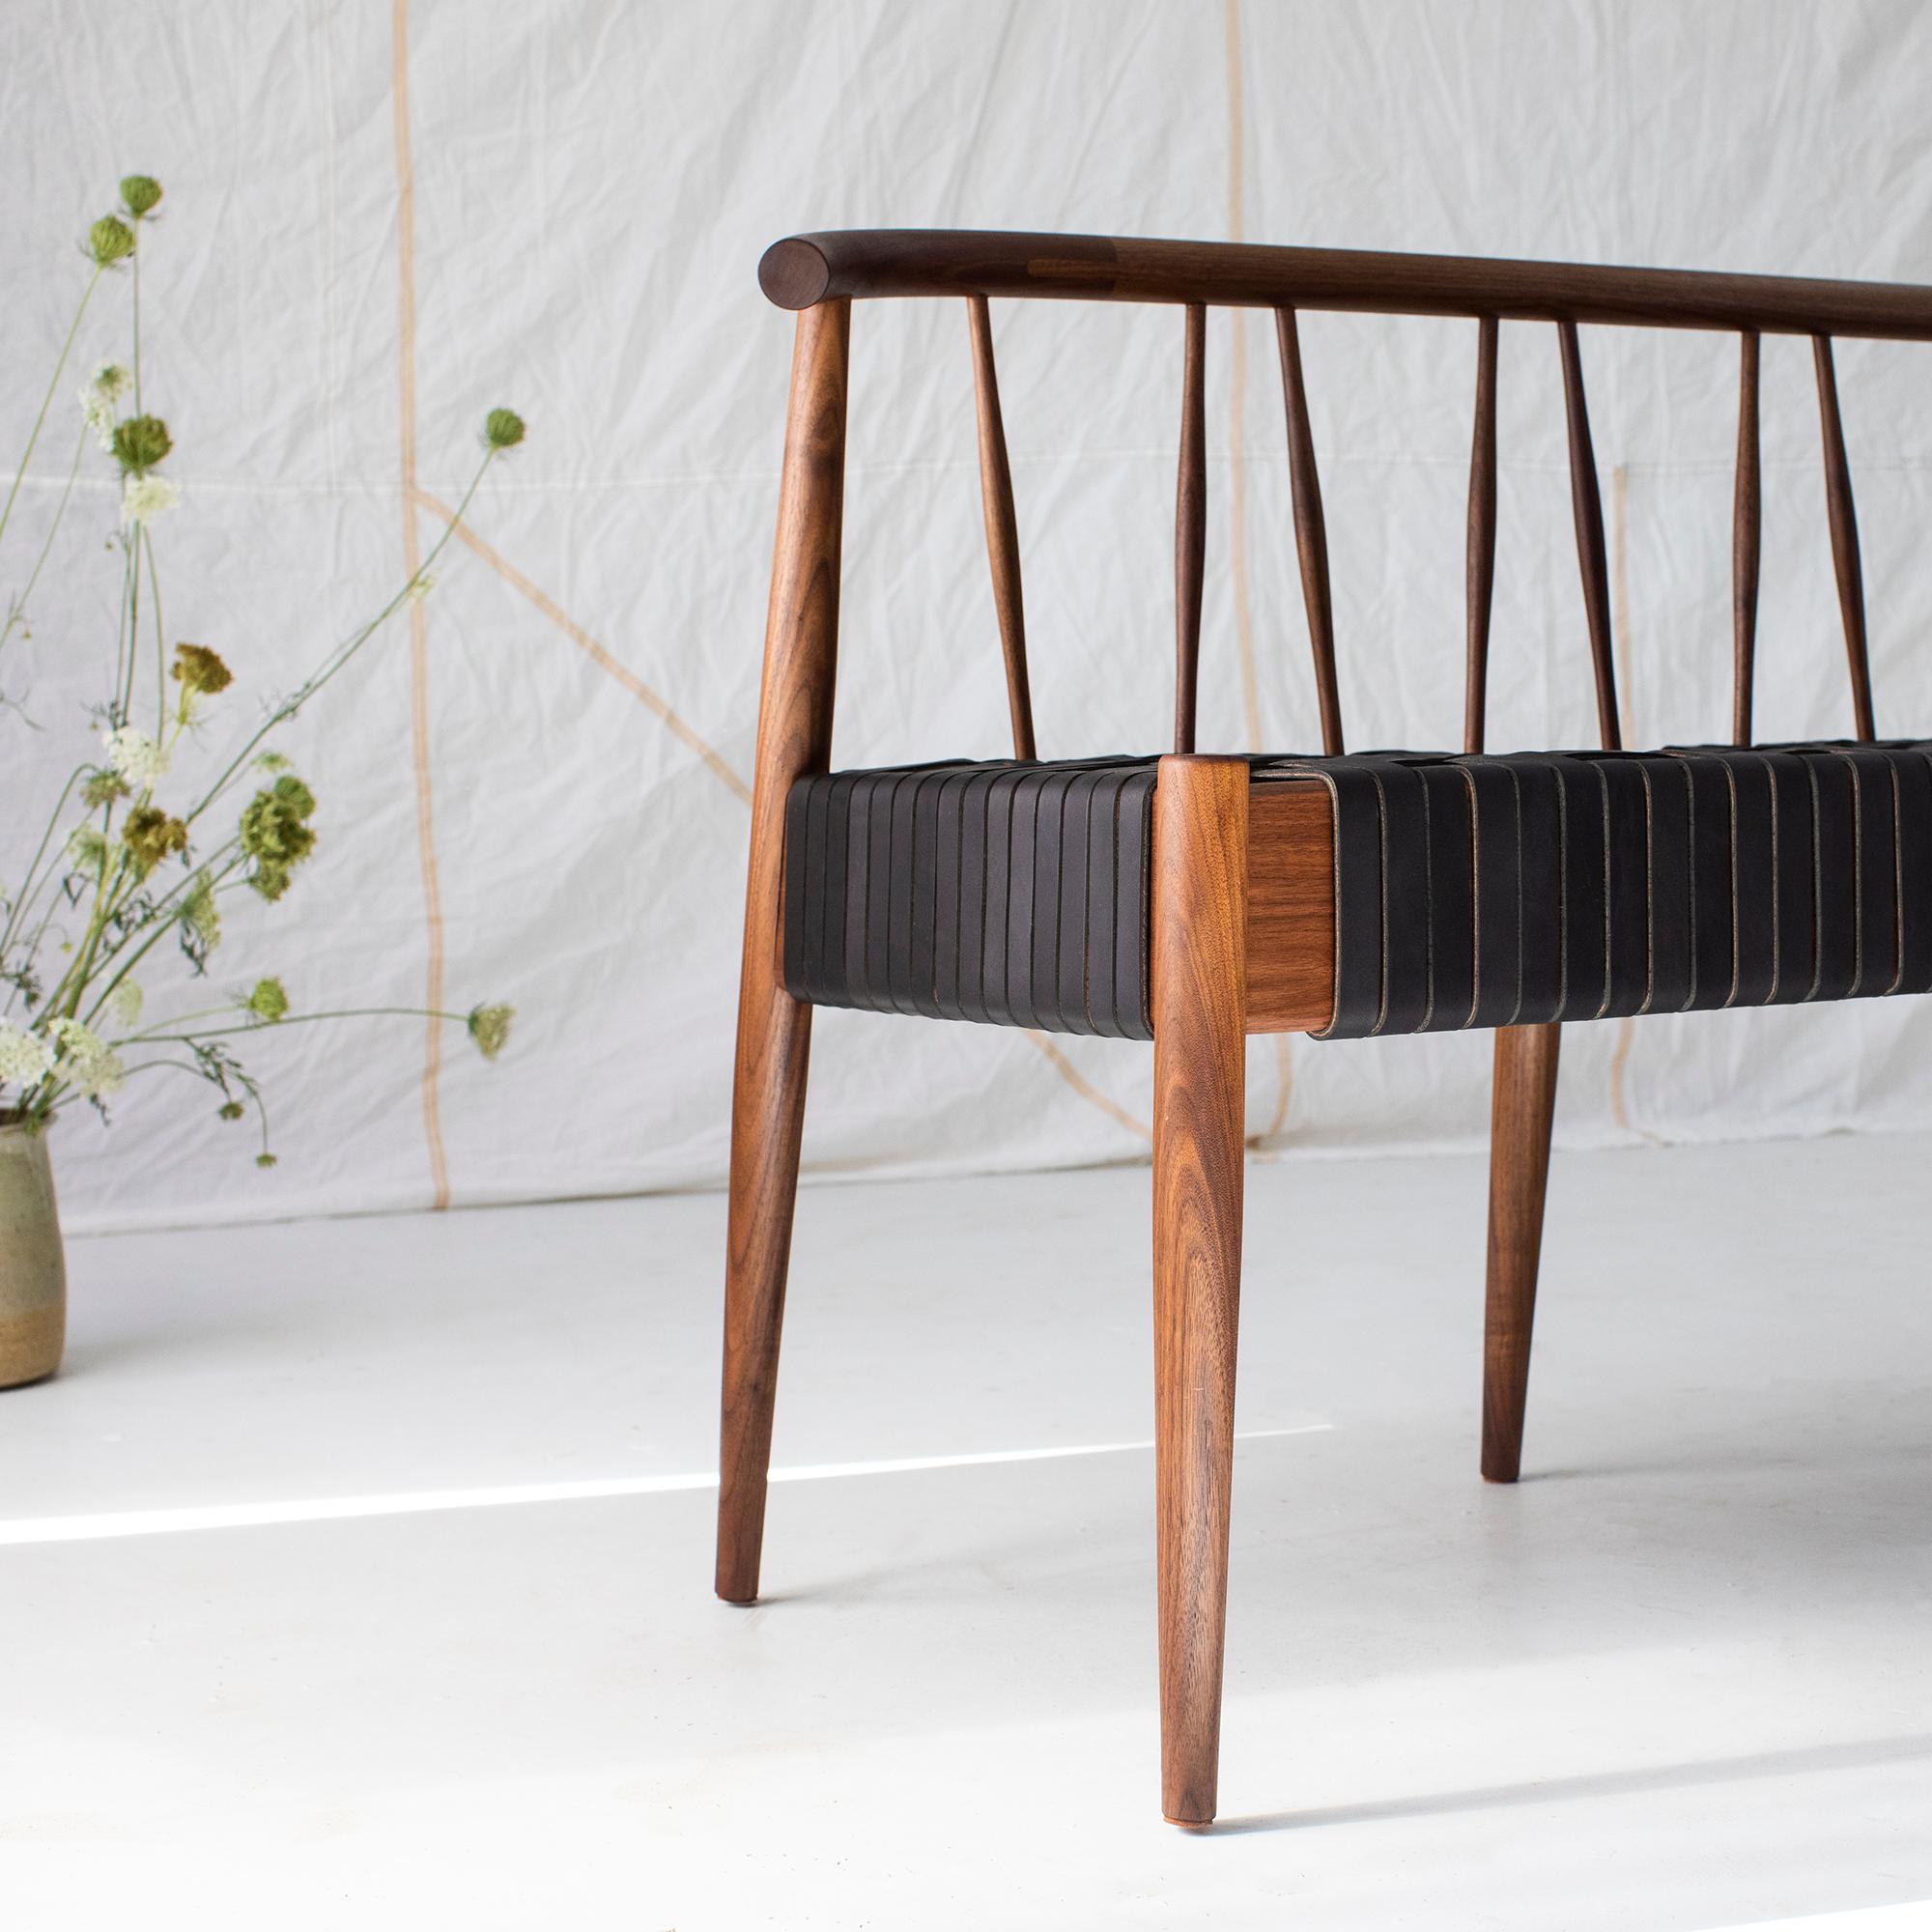 woven leather bench with back